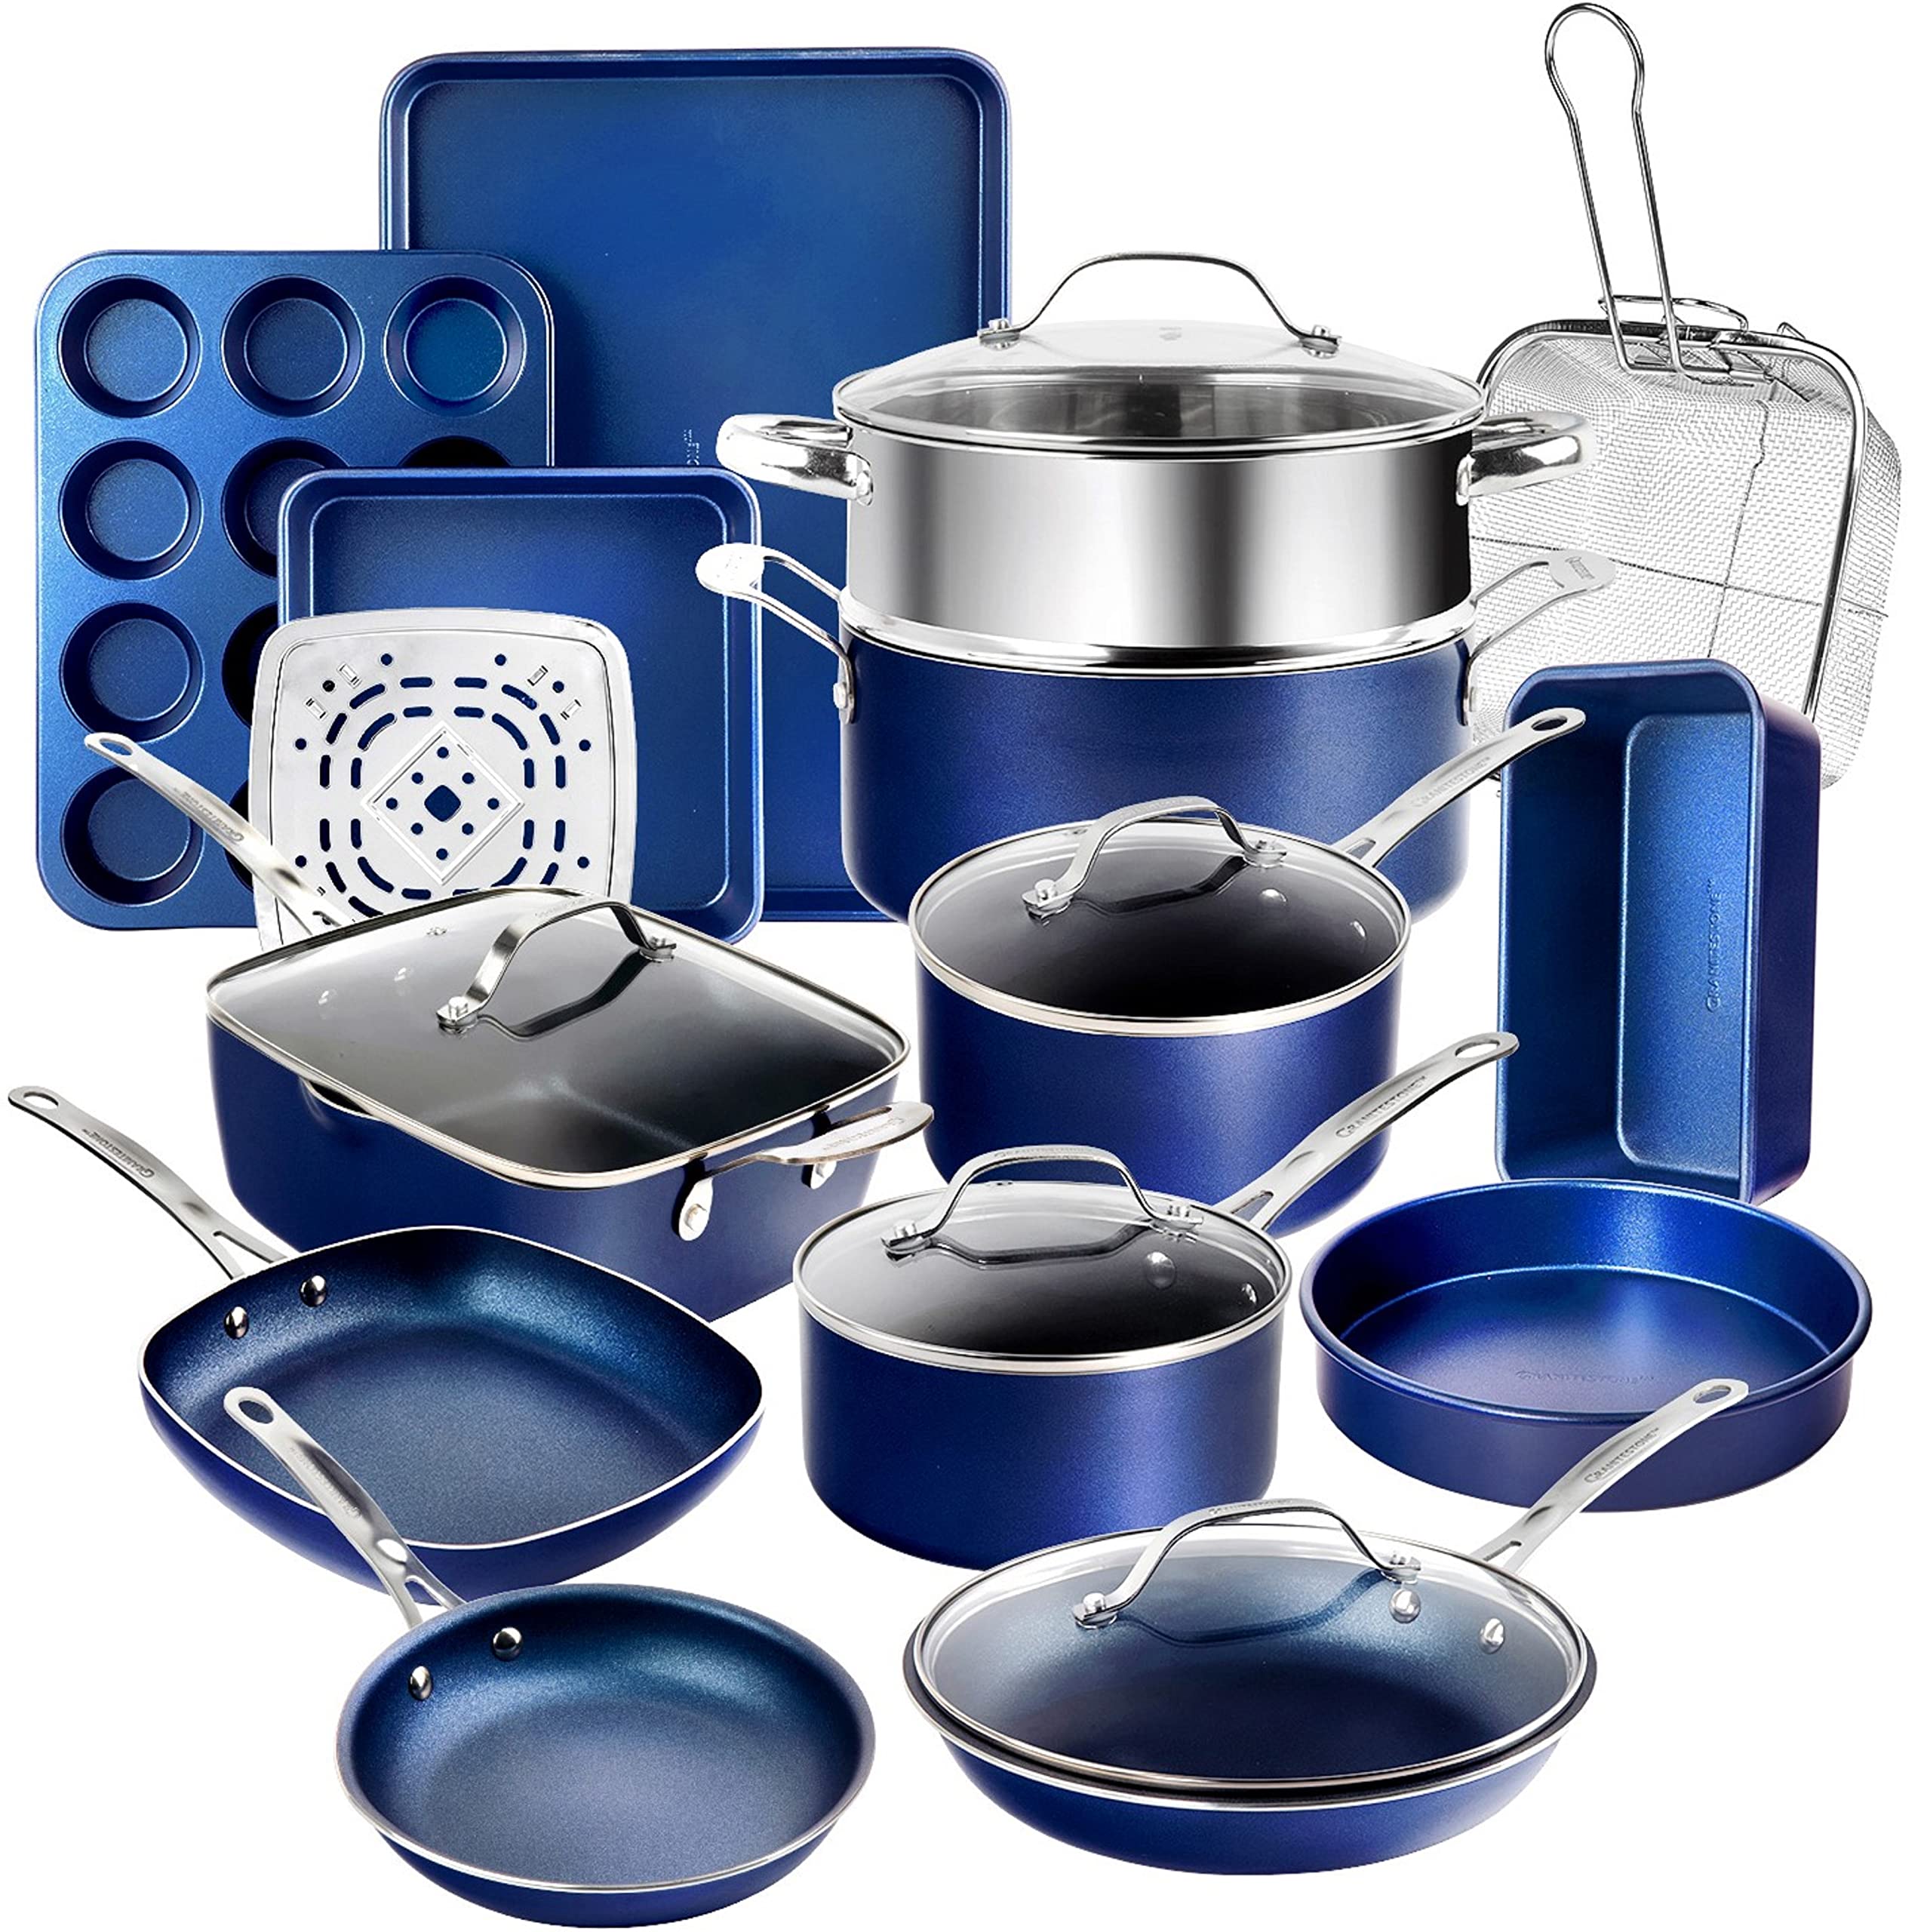 Granitestone Blue 20 Pc Pots and Pans Set Nonstick Clearance, Complete Kitchen Cookware Set with Non Stick Pots and Pans Set with Lids + Bakeware for Cooking, Oven/Dishwasher Safe, 100% Non Toxic